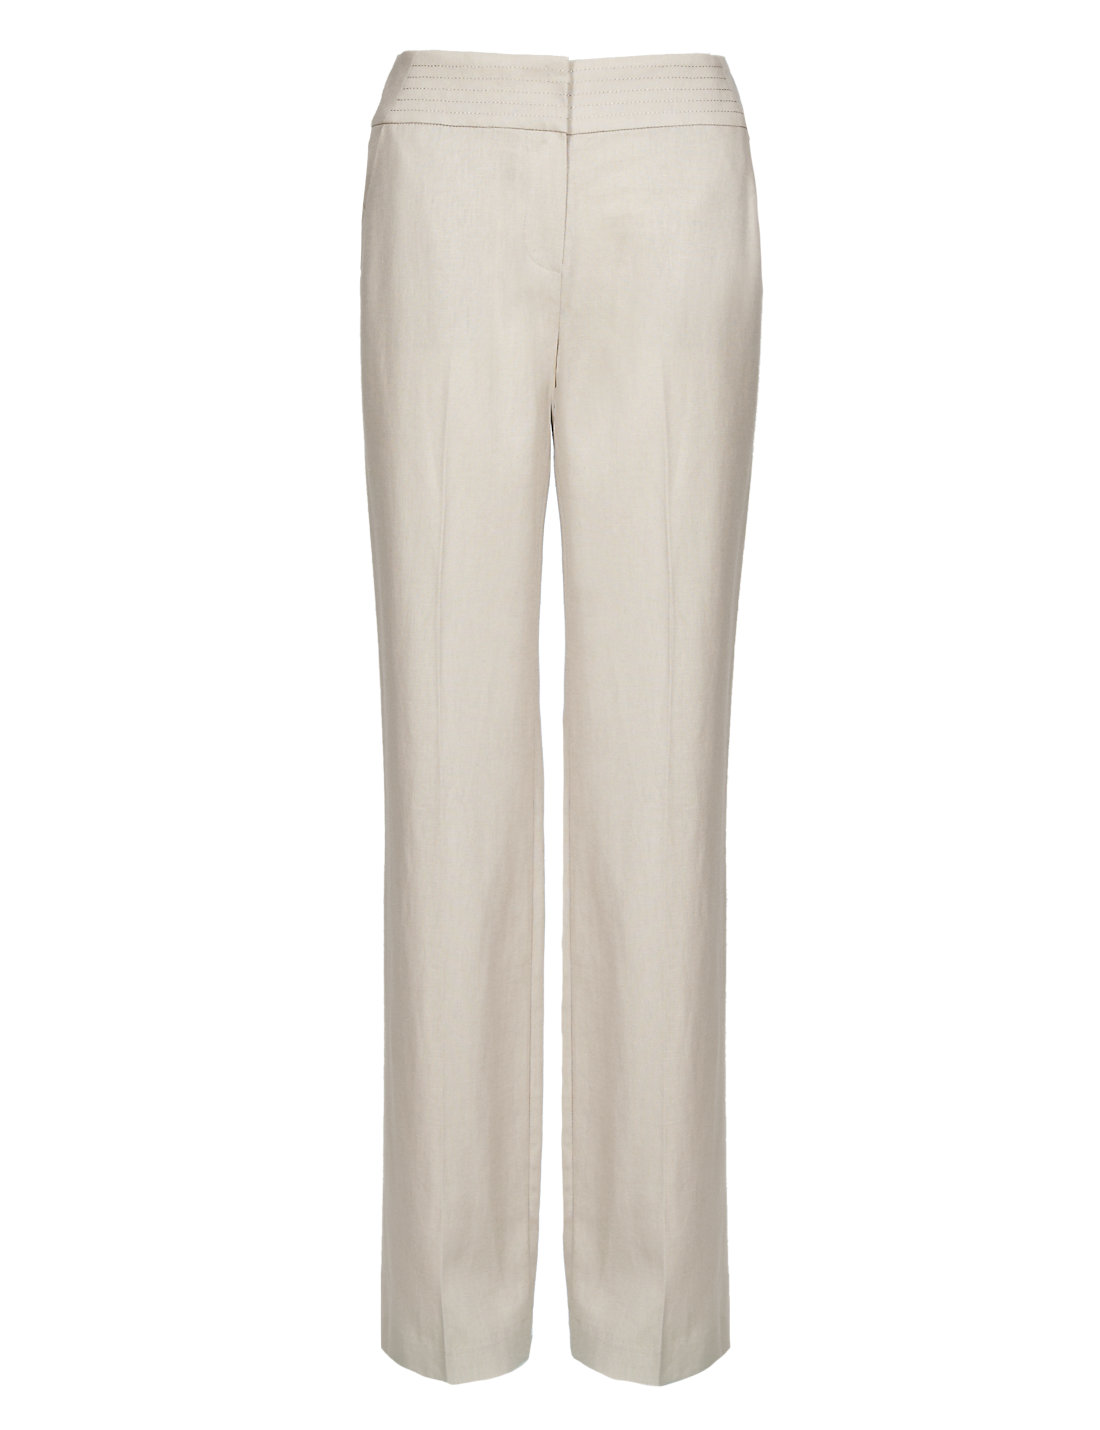 Marks and Spencer - - M&5 10pcs BNWT Assorted Ladies Trousers - Size 8 ...